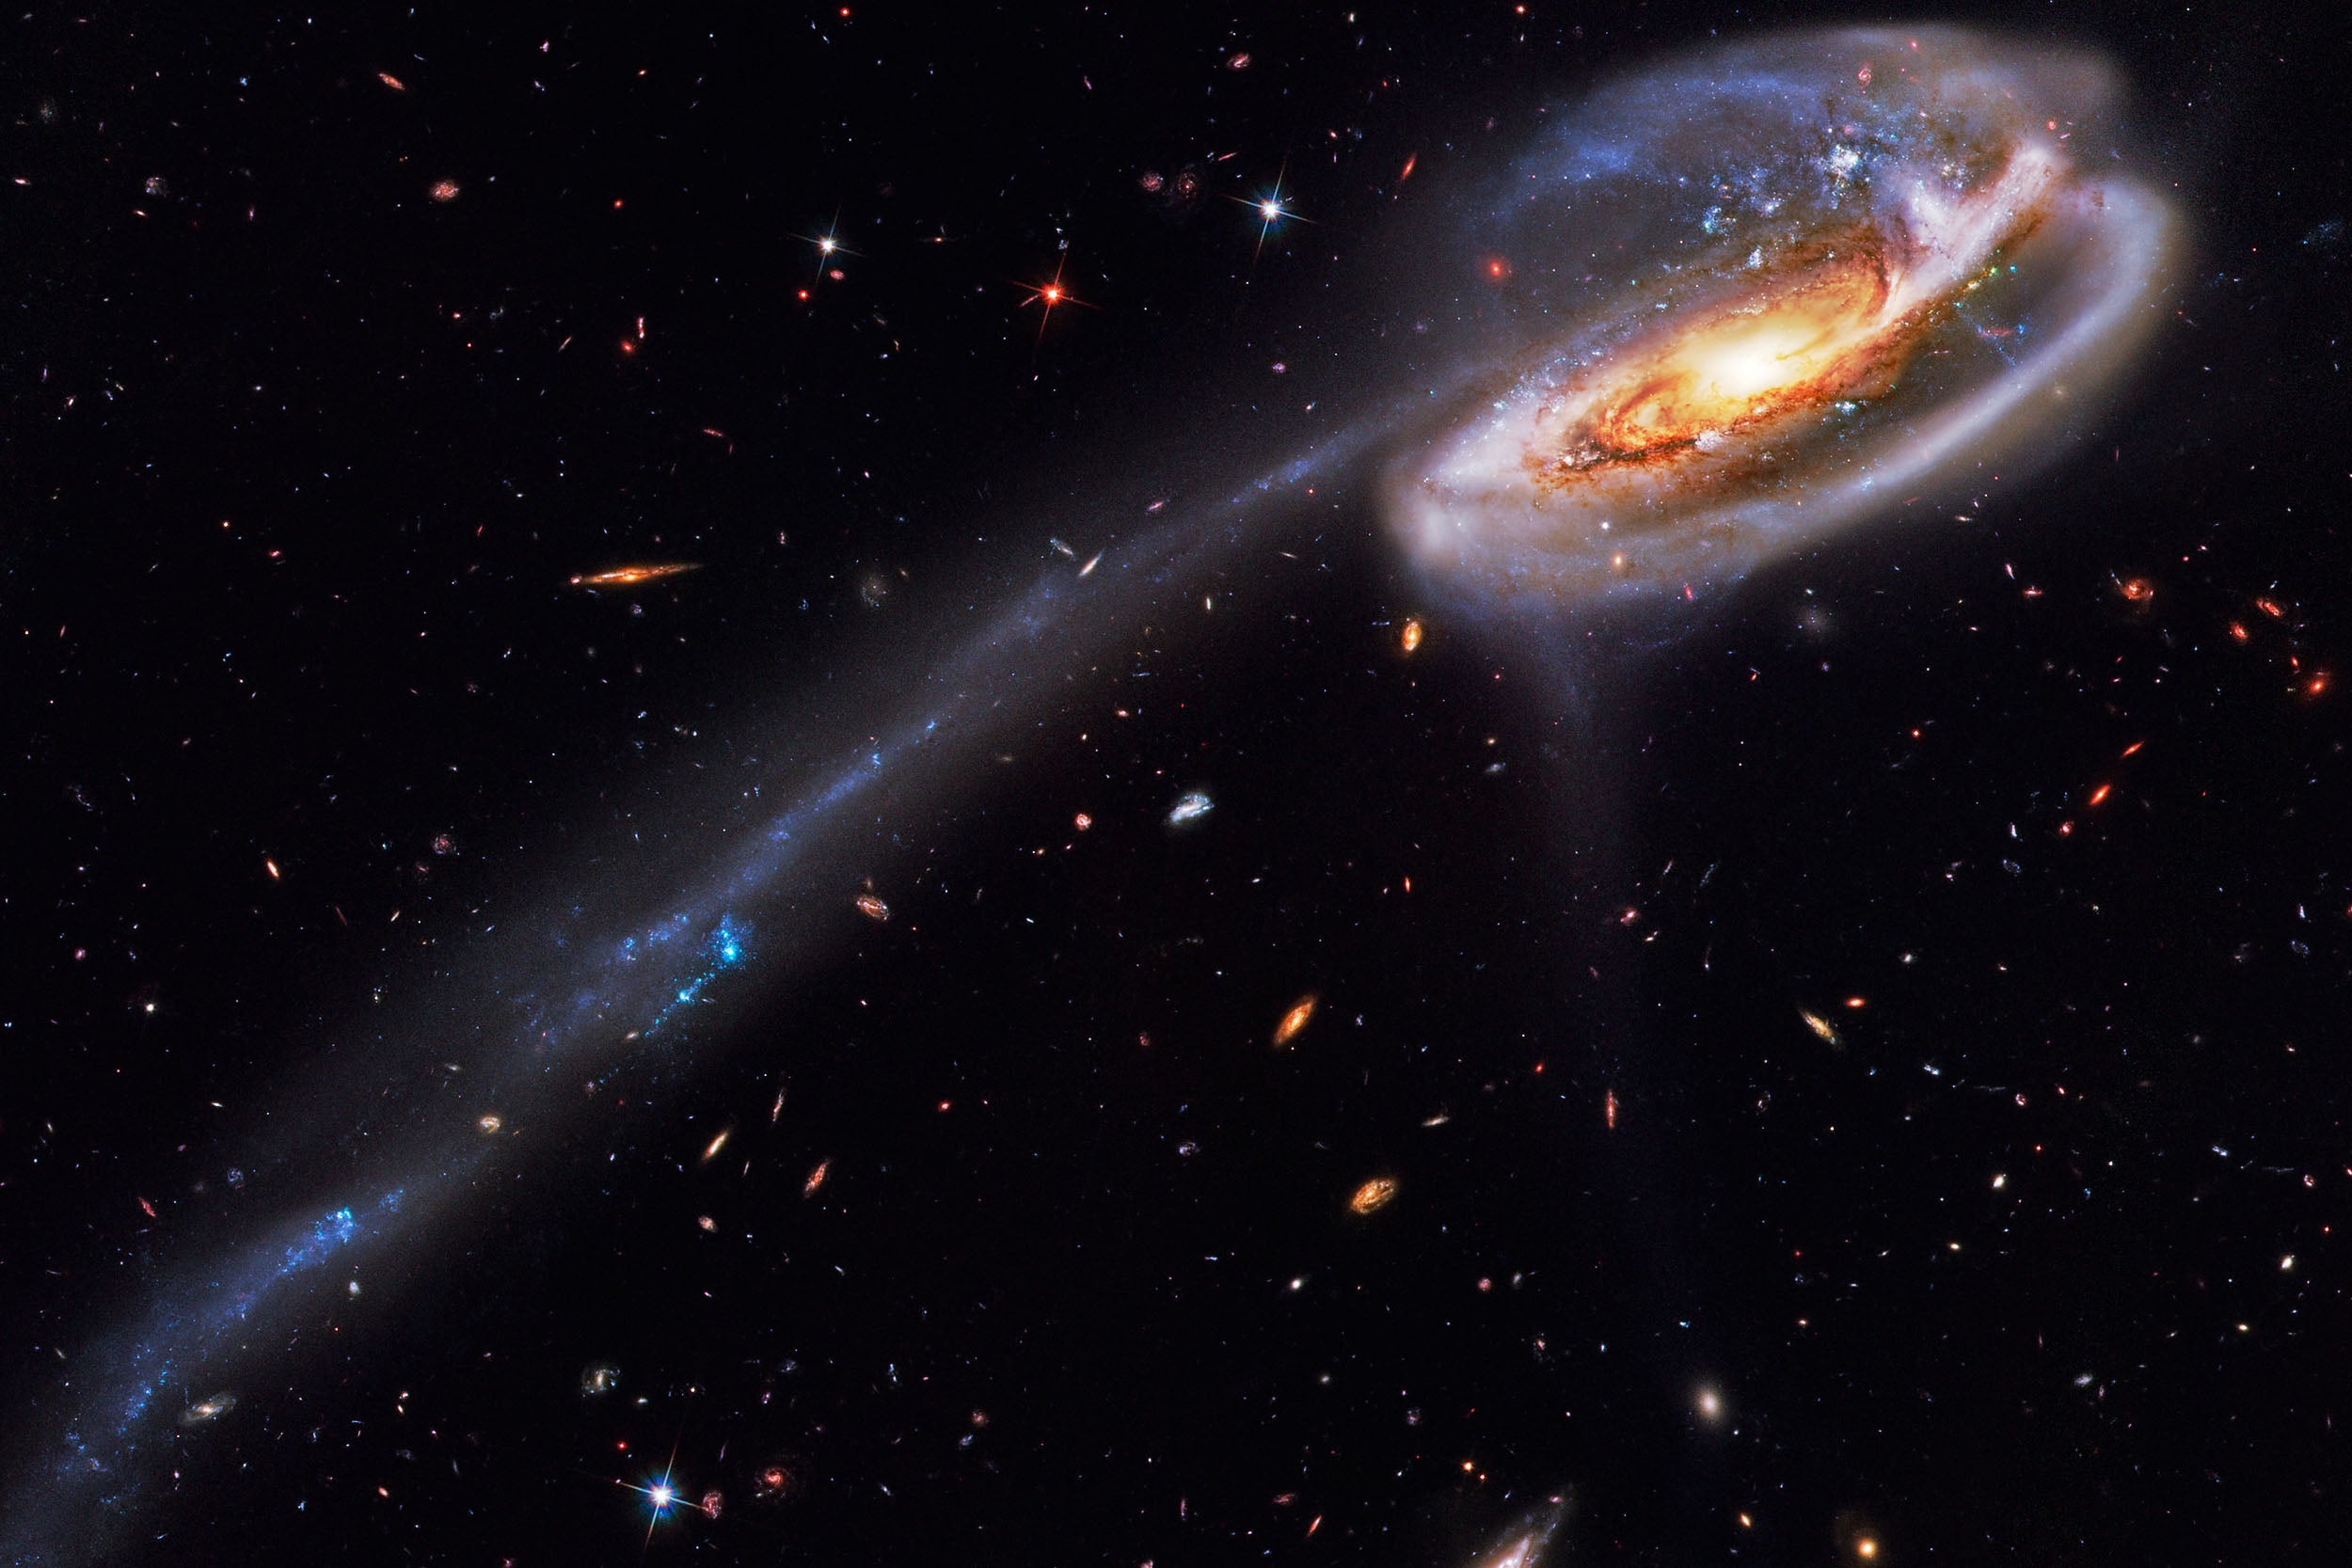 An image of the Tadpole Galaxy based on data from the Hubble Space Telescope